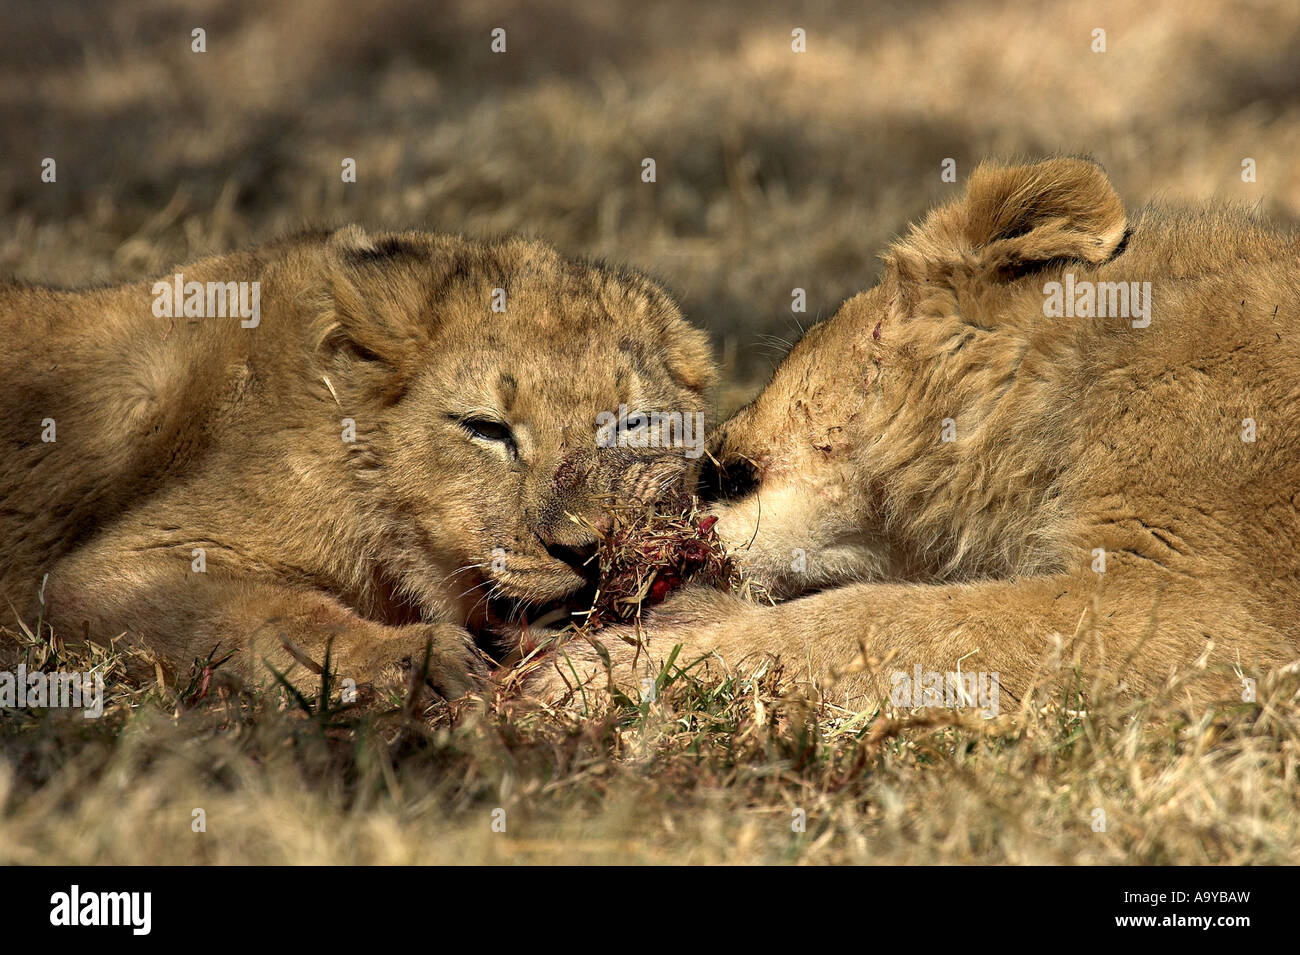 Lion cubs sharing a scrap of food - South Africa Stock Photo